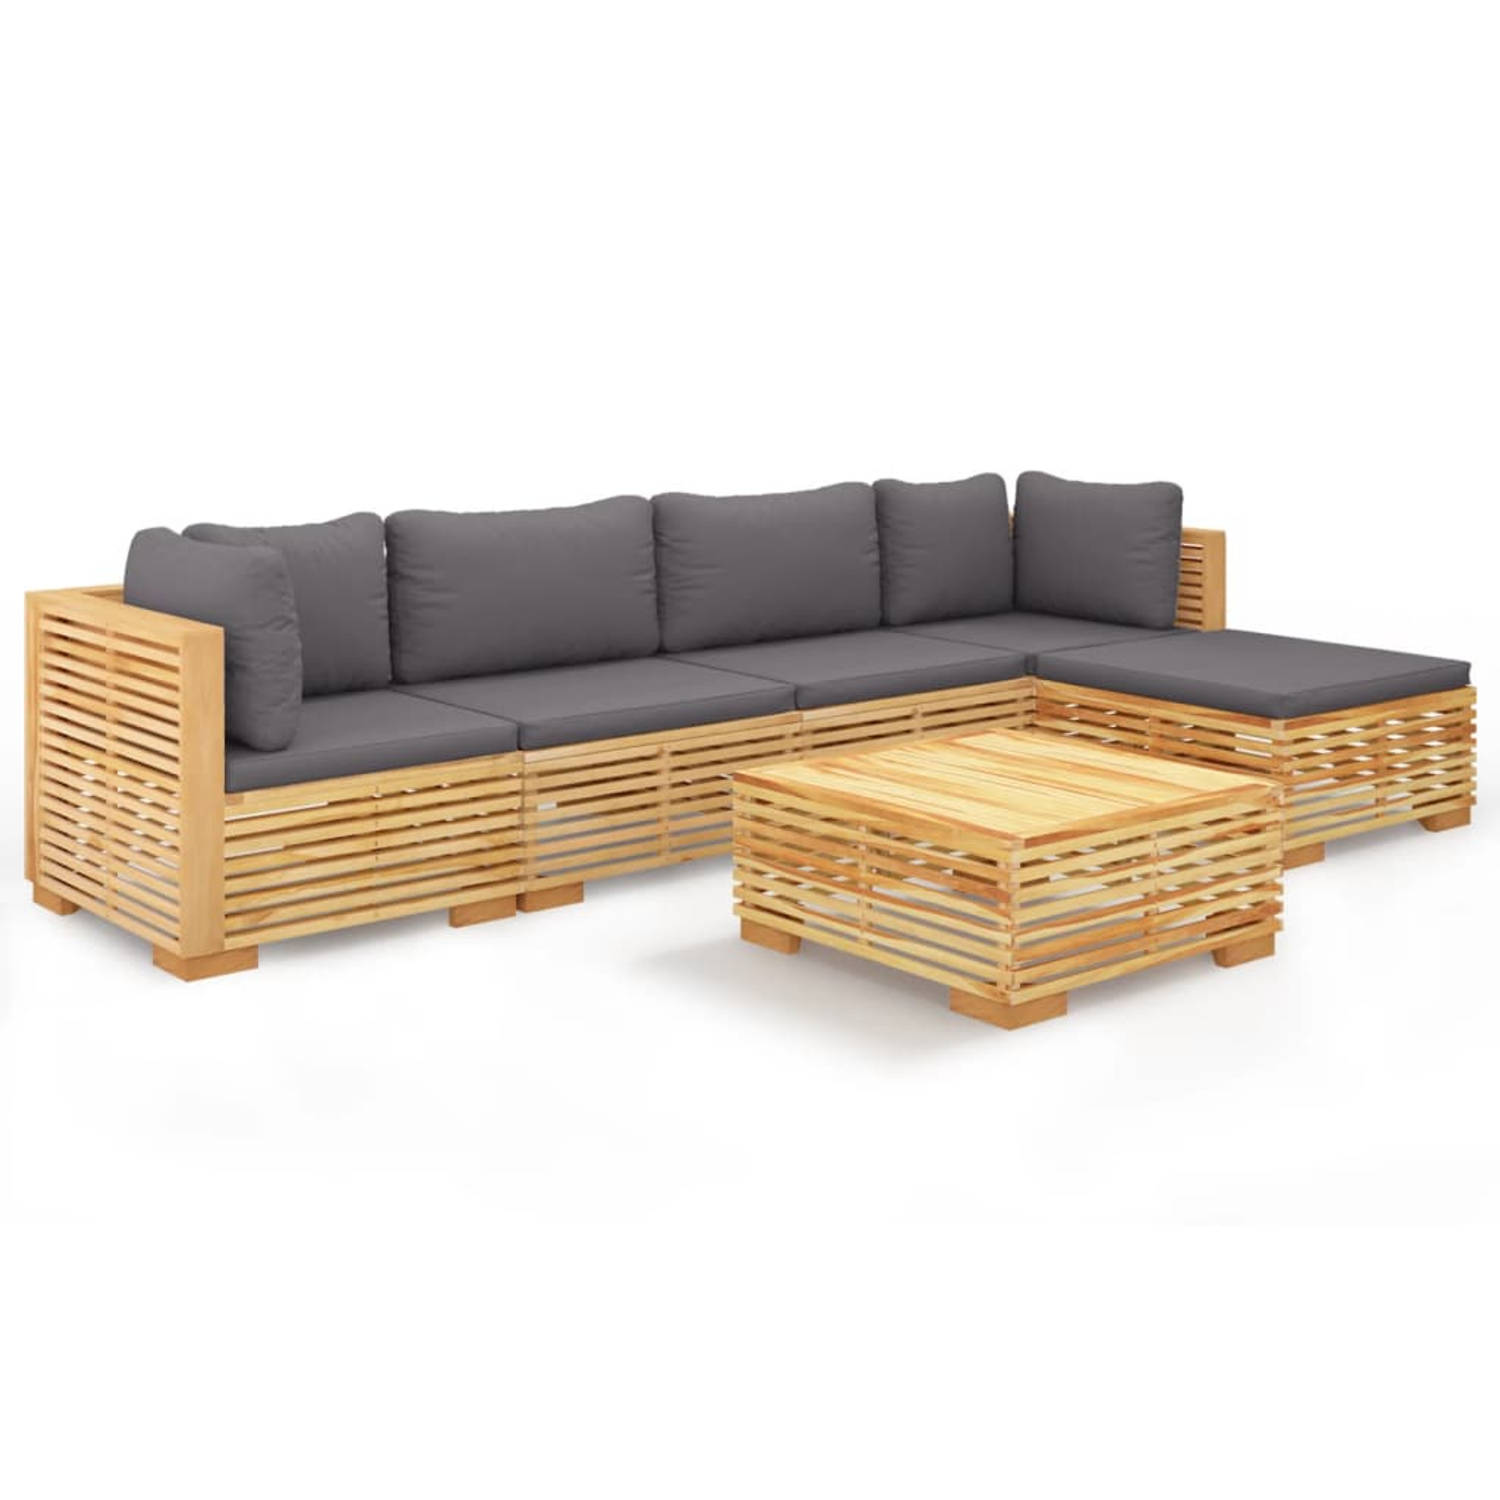 The Living Store Loungeset Teakhout Tuinmeubelen 69.5x69.5x60 cm Inclusief kussens Donkergrijs